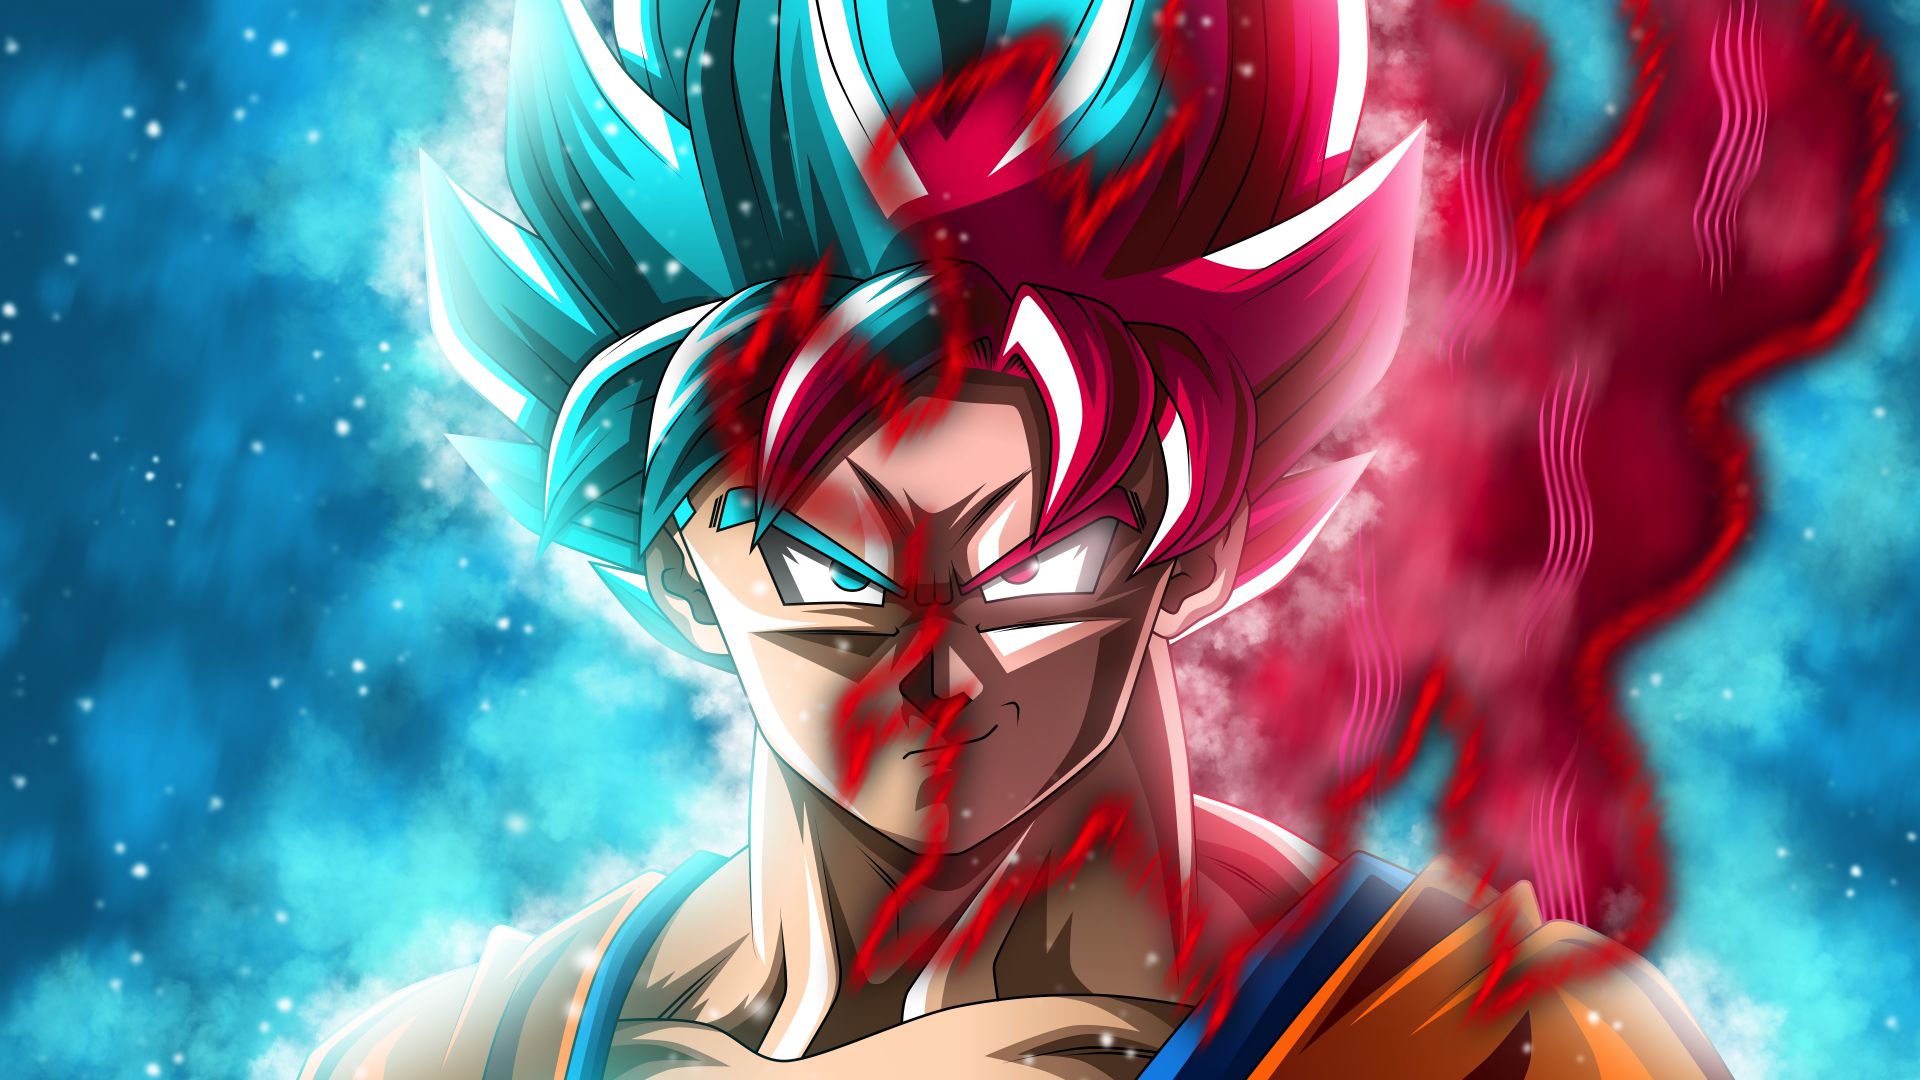 Desktop Wallpaper Goku, Angry Face, Anime Boy, Dragon Ball, Hd Image,  Picture, Background, 8d32ab